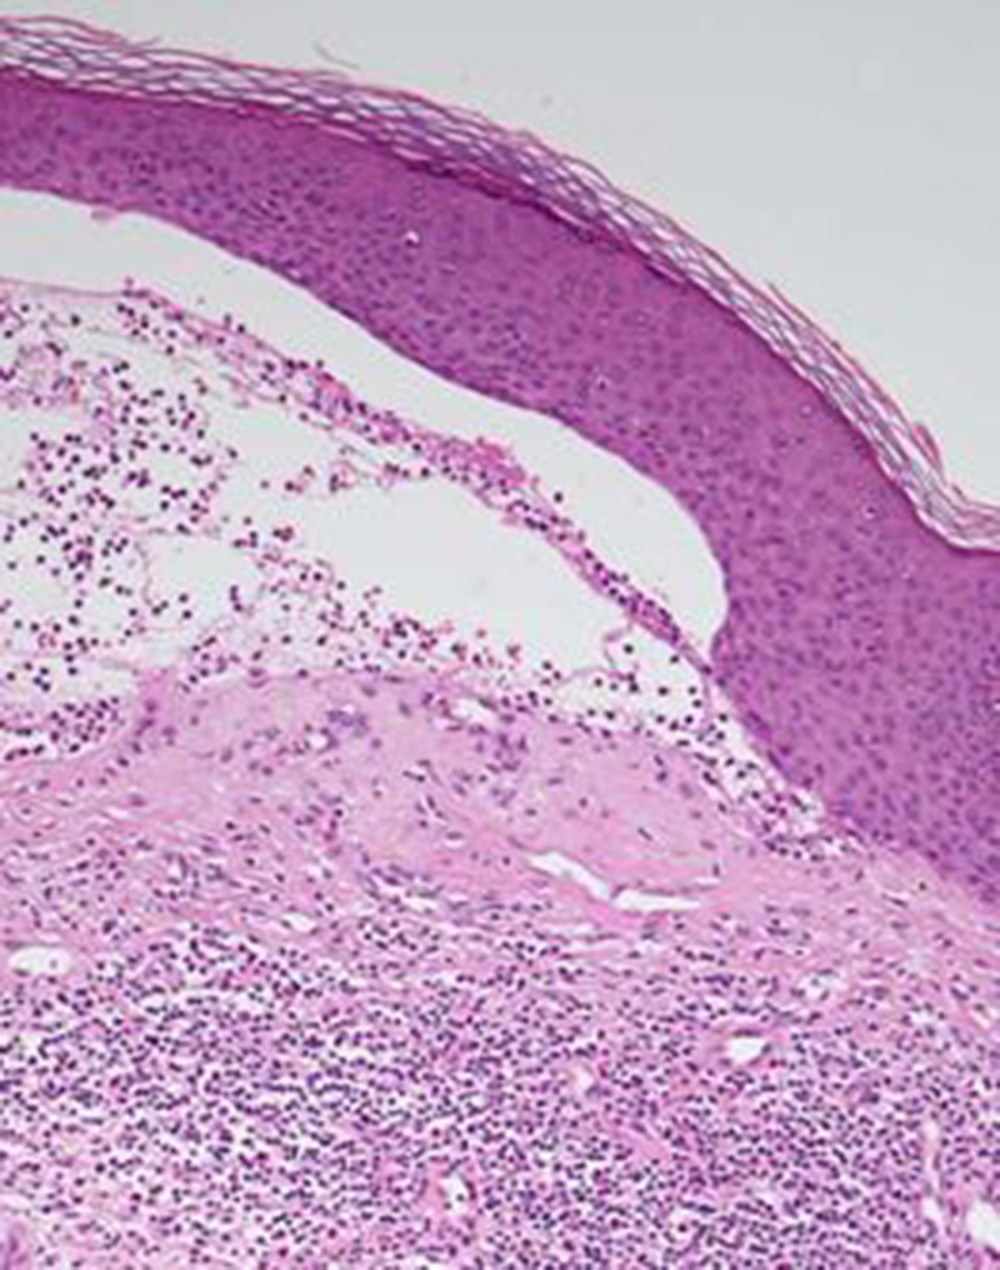 Subepidermal blister along with underlying polymorphous infiltrate, mainly of an eosinophilic profile.